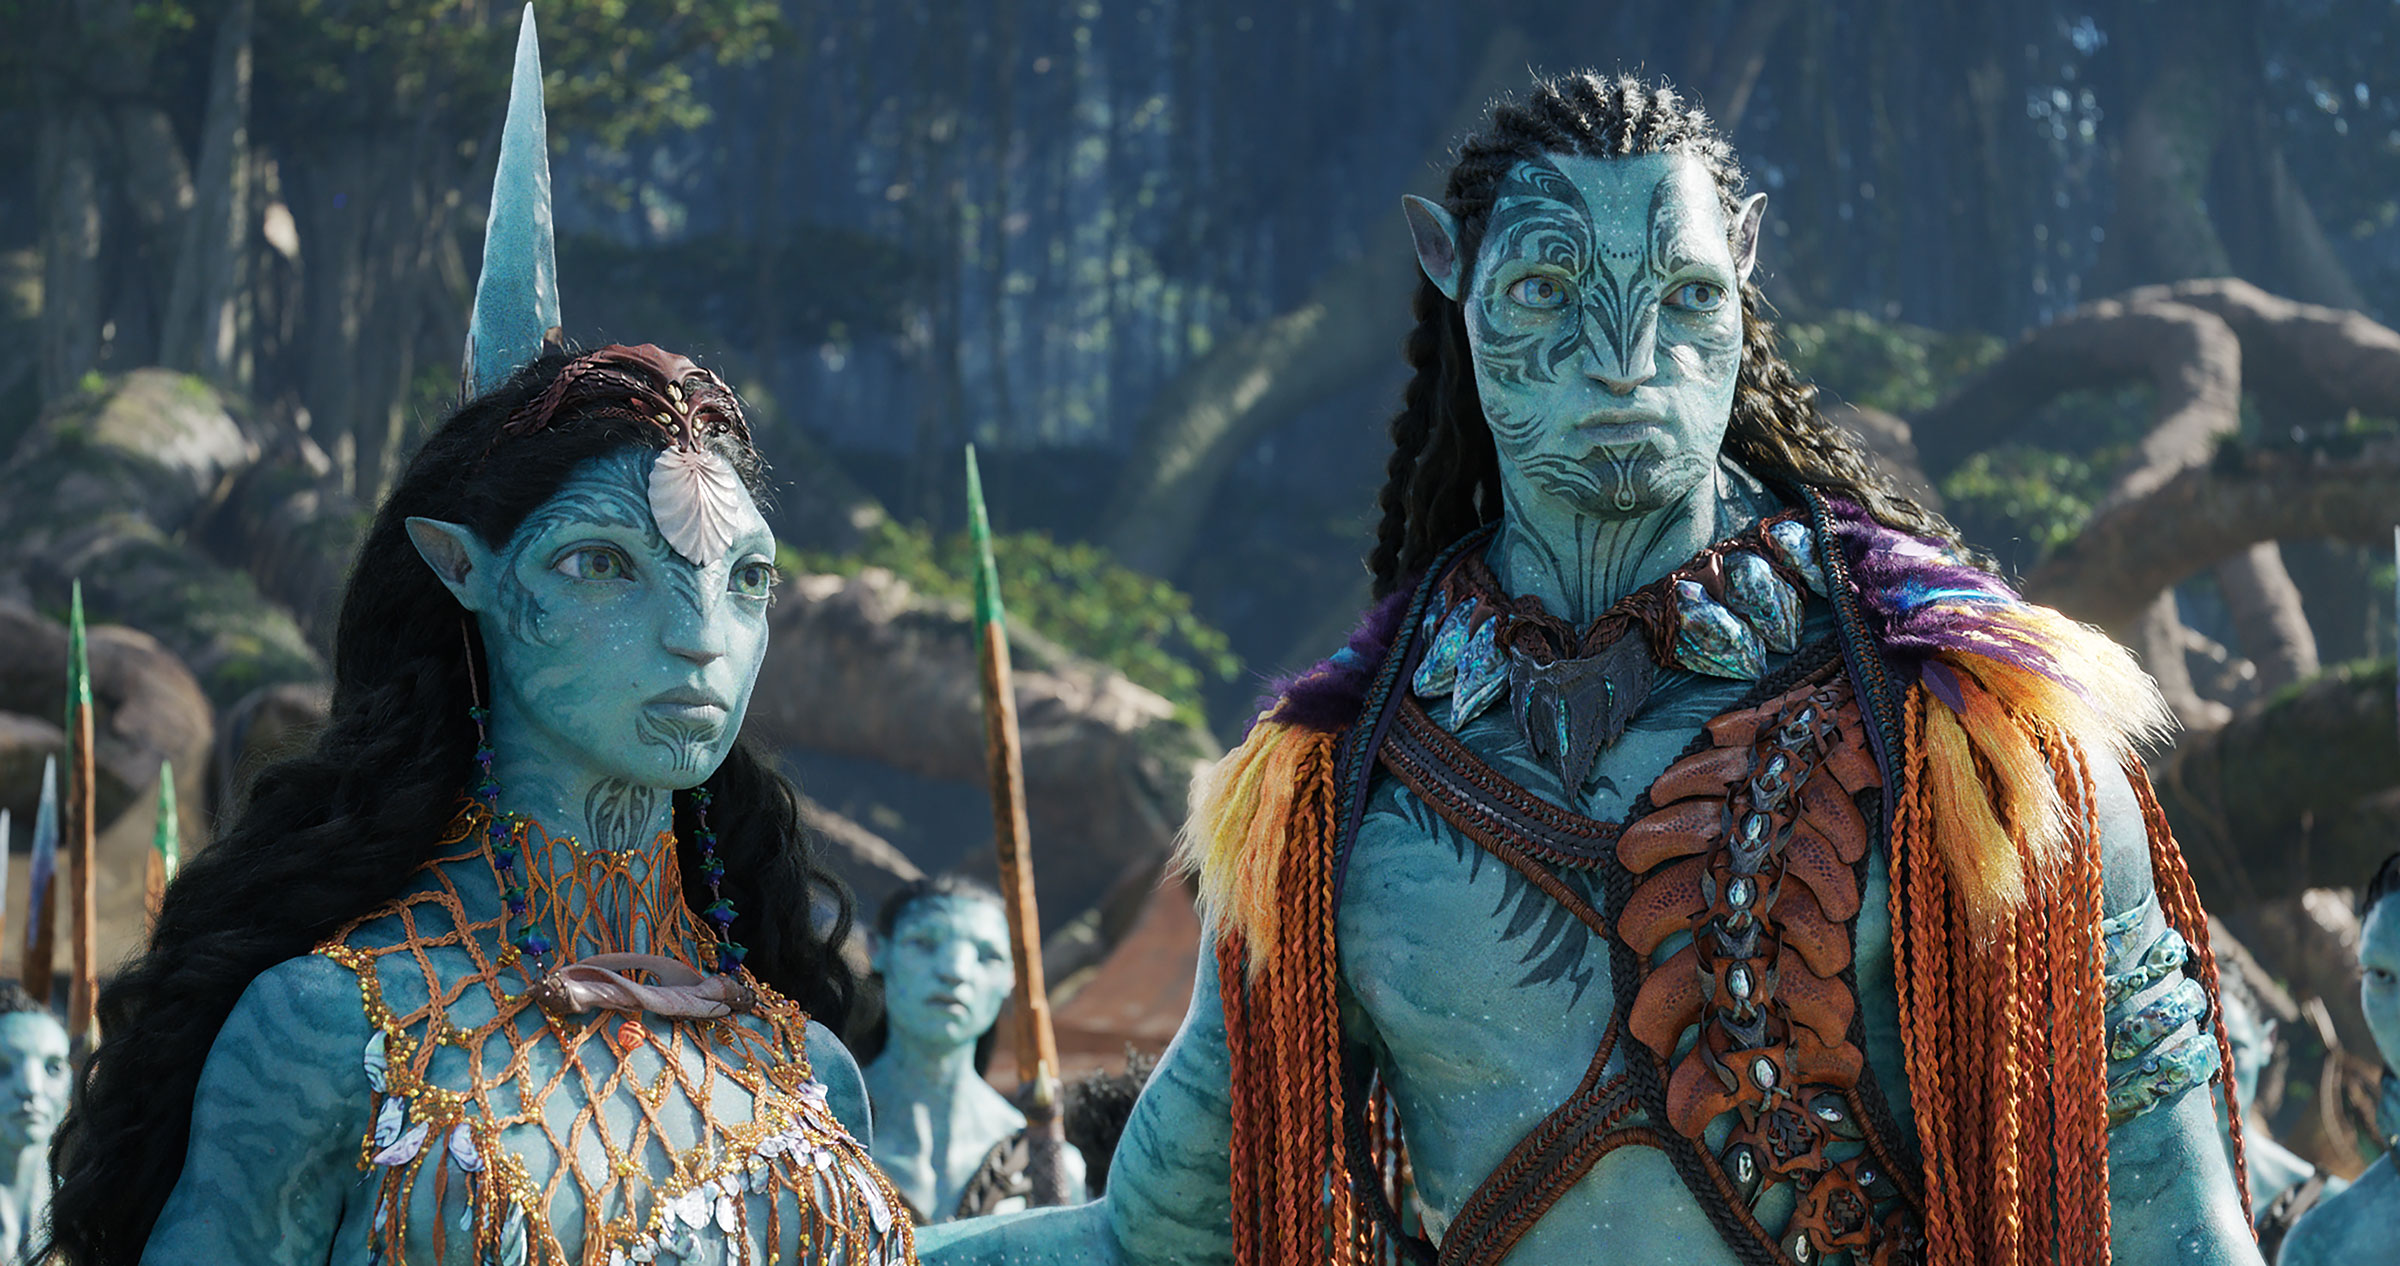 Avatar 2 Box Office James Camerons Film Is The 16th Highest Grosser In  North America Surpasses Star Wars The Rise of Skywalker